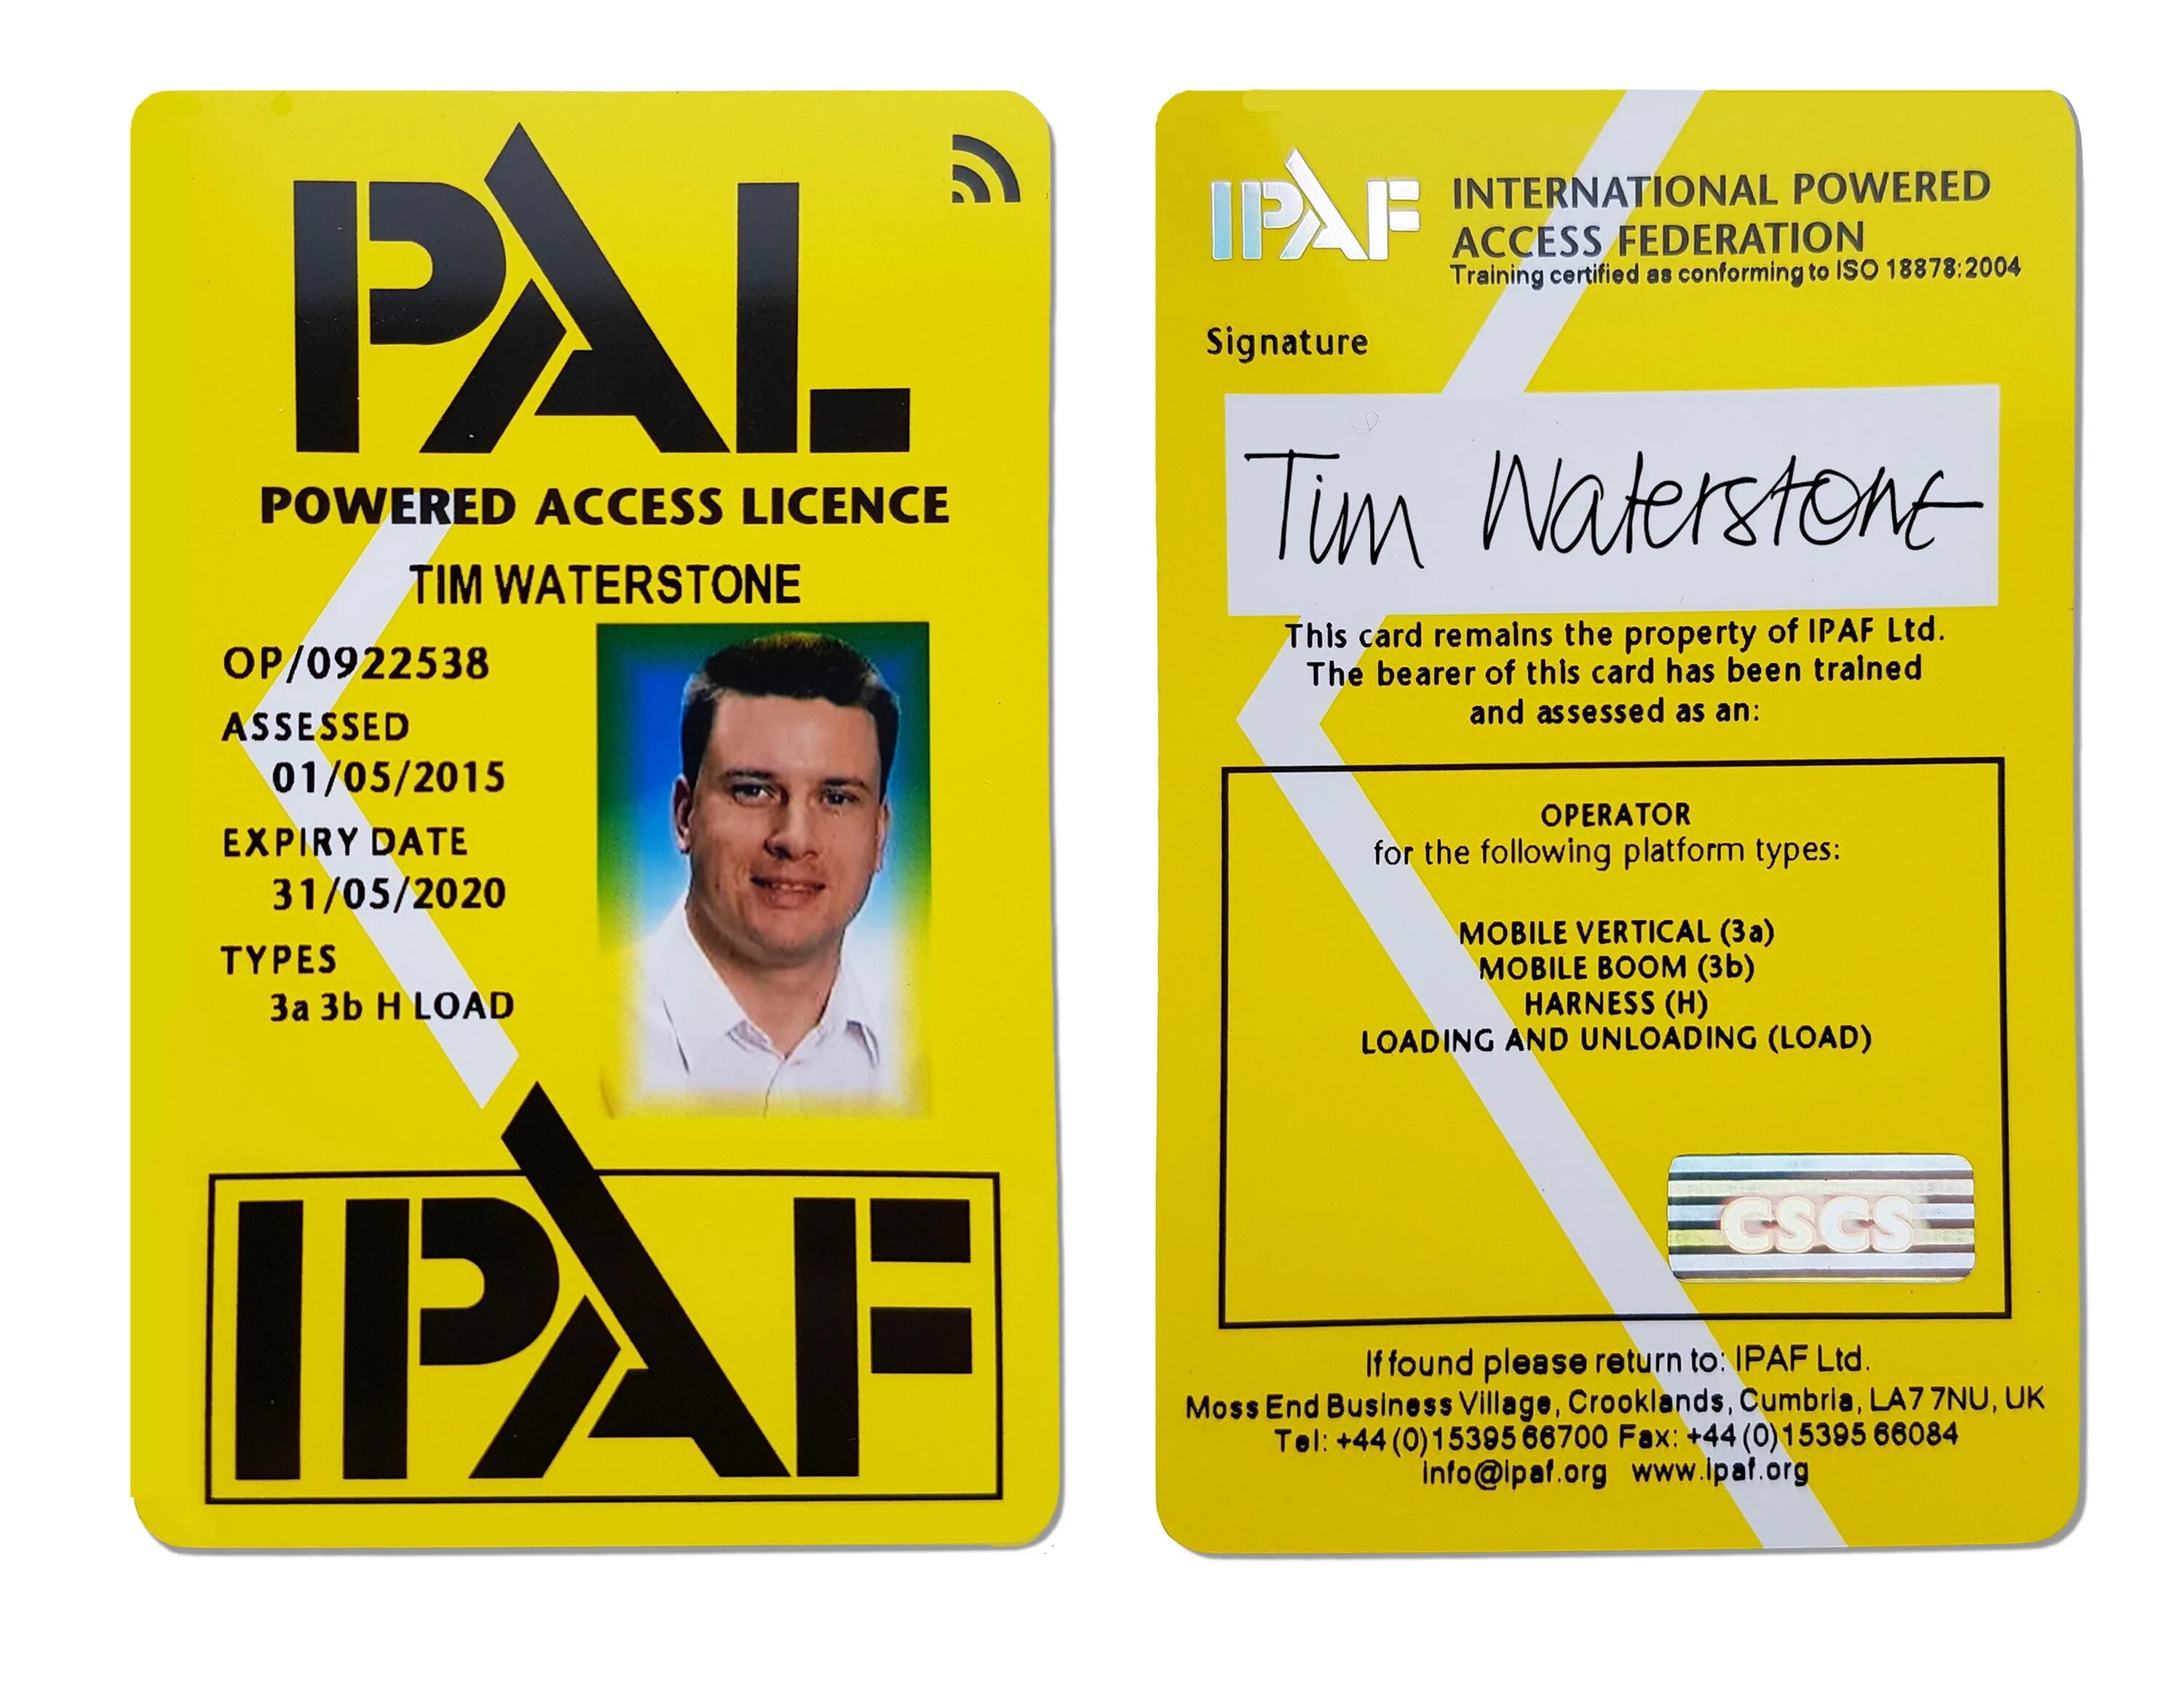 IPAF Federation. Access Power. Access powered